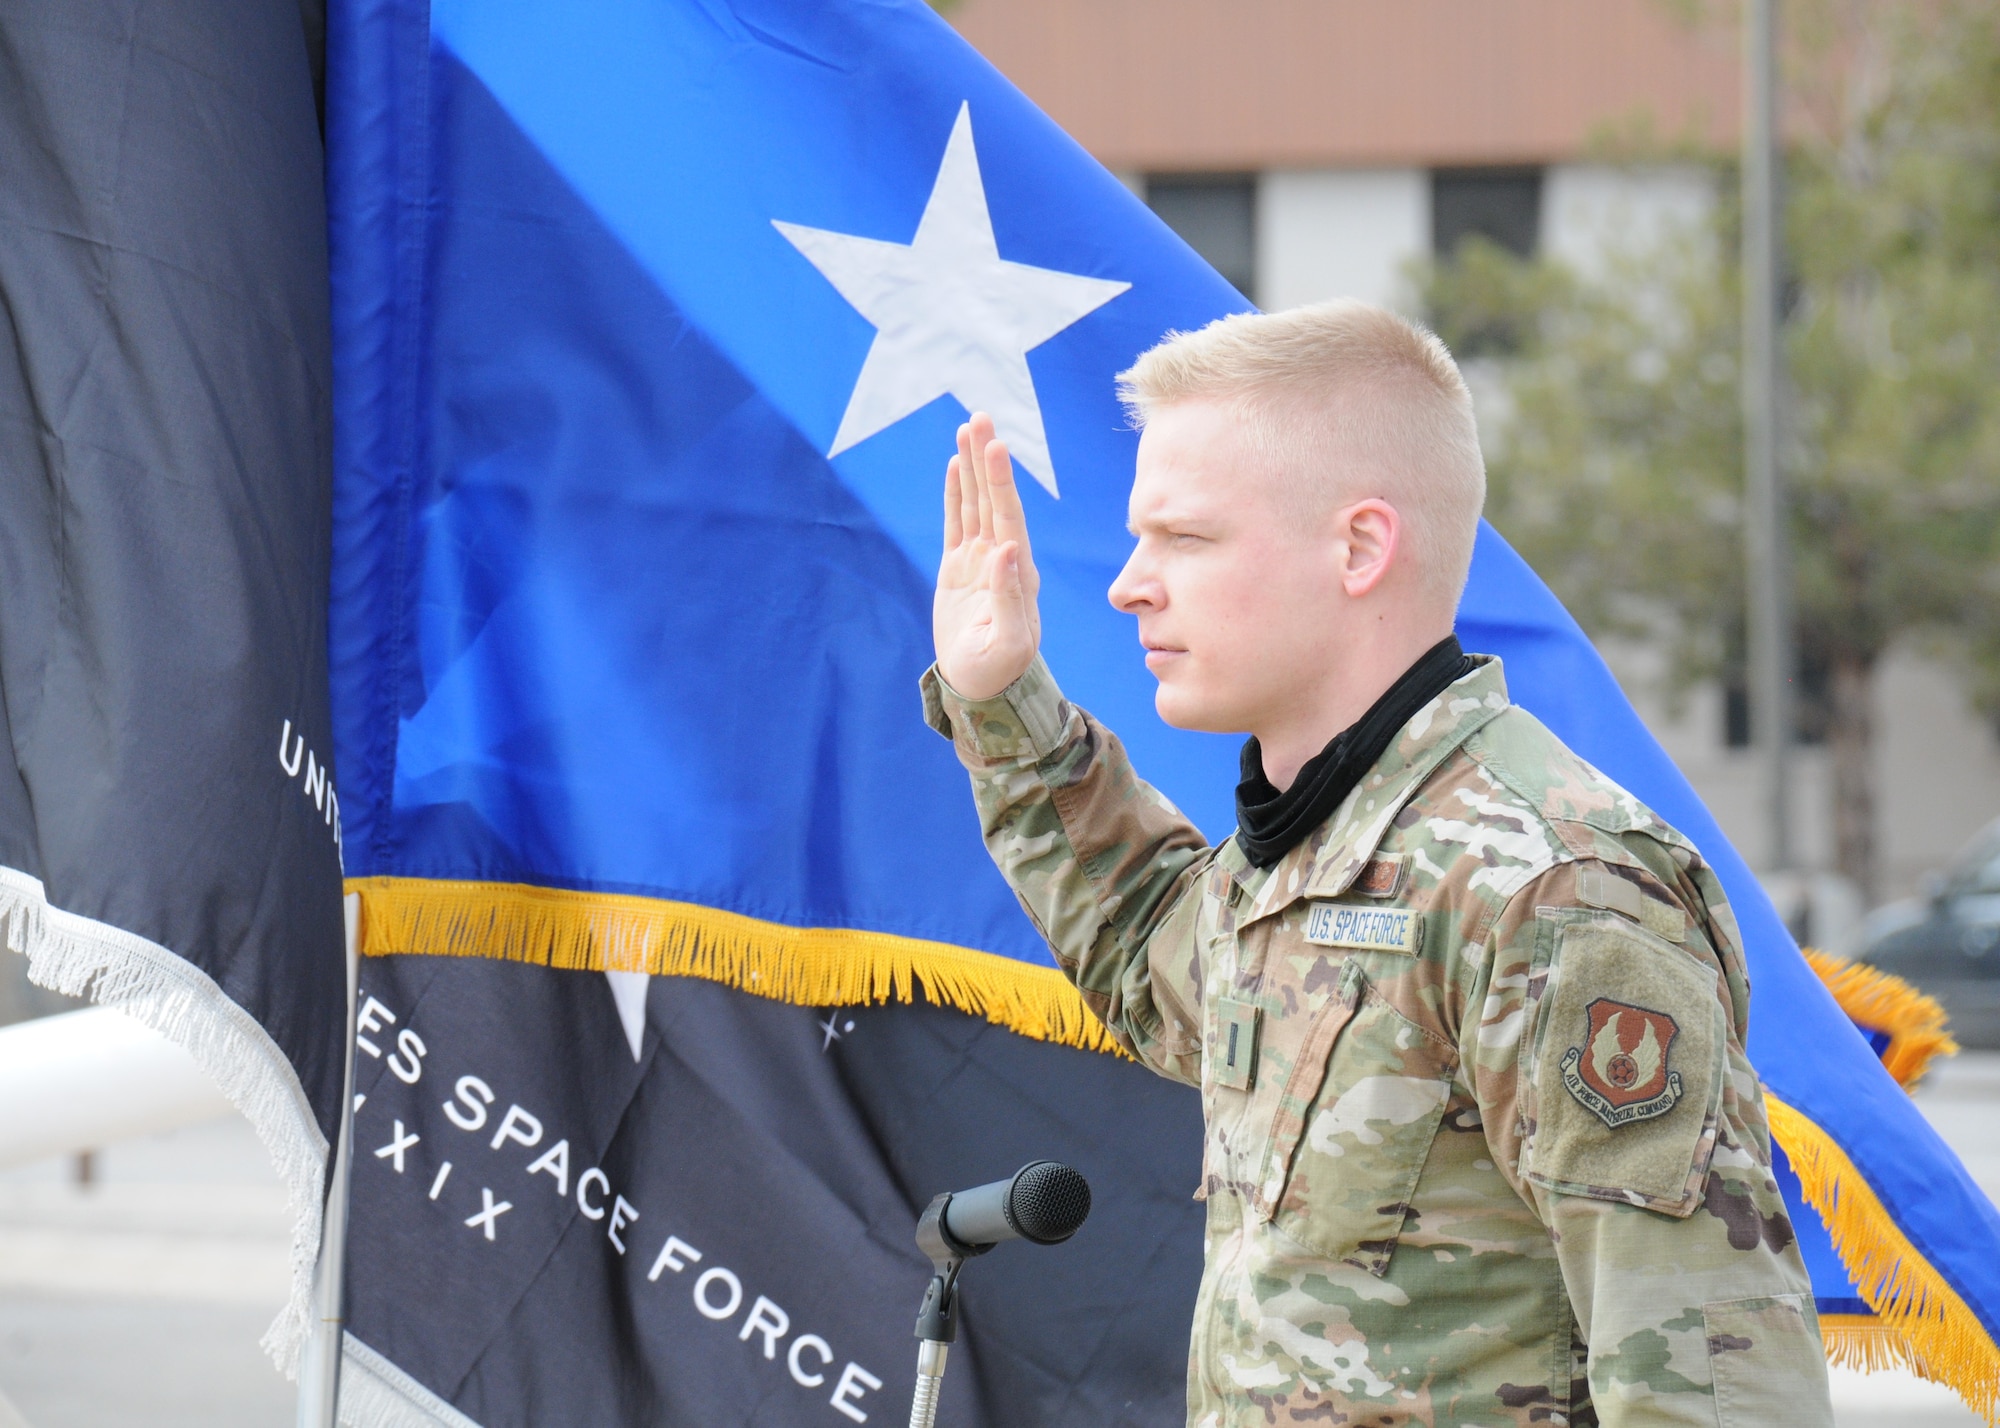 Air Force Research Laboratory engineer 1st Lt. Andrew Vogel takes the oath of office to transfer from the U.S. Air Force to the U.S. Space Force in an AFRL induction ceremony of 13 AFRL officers held Feb. 1 at Kirtland AFB, N.M. (U.S. Air Force photo/John Michael Cochran)